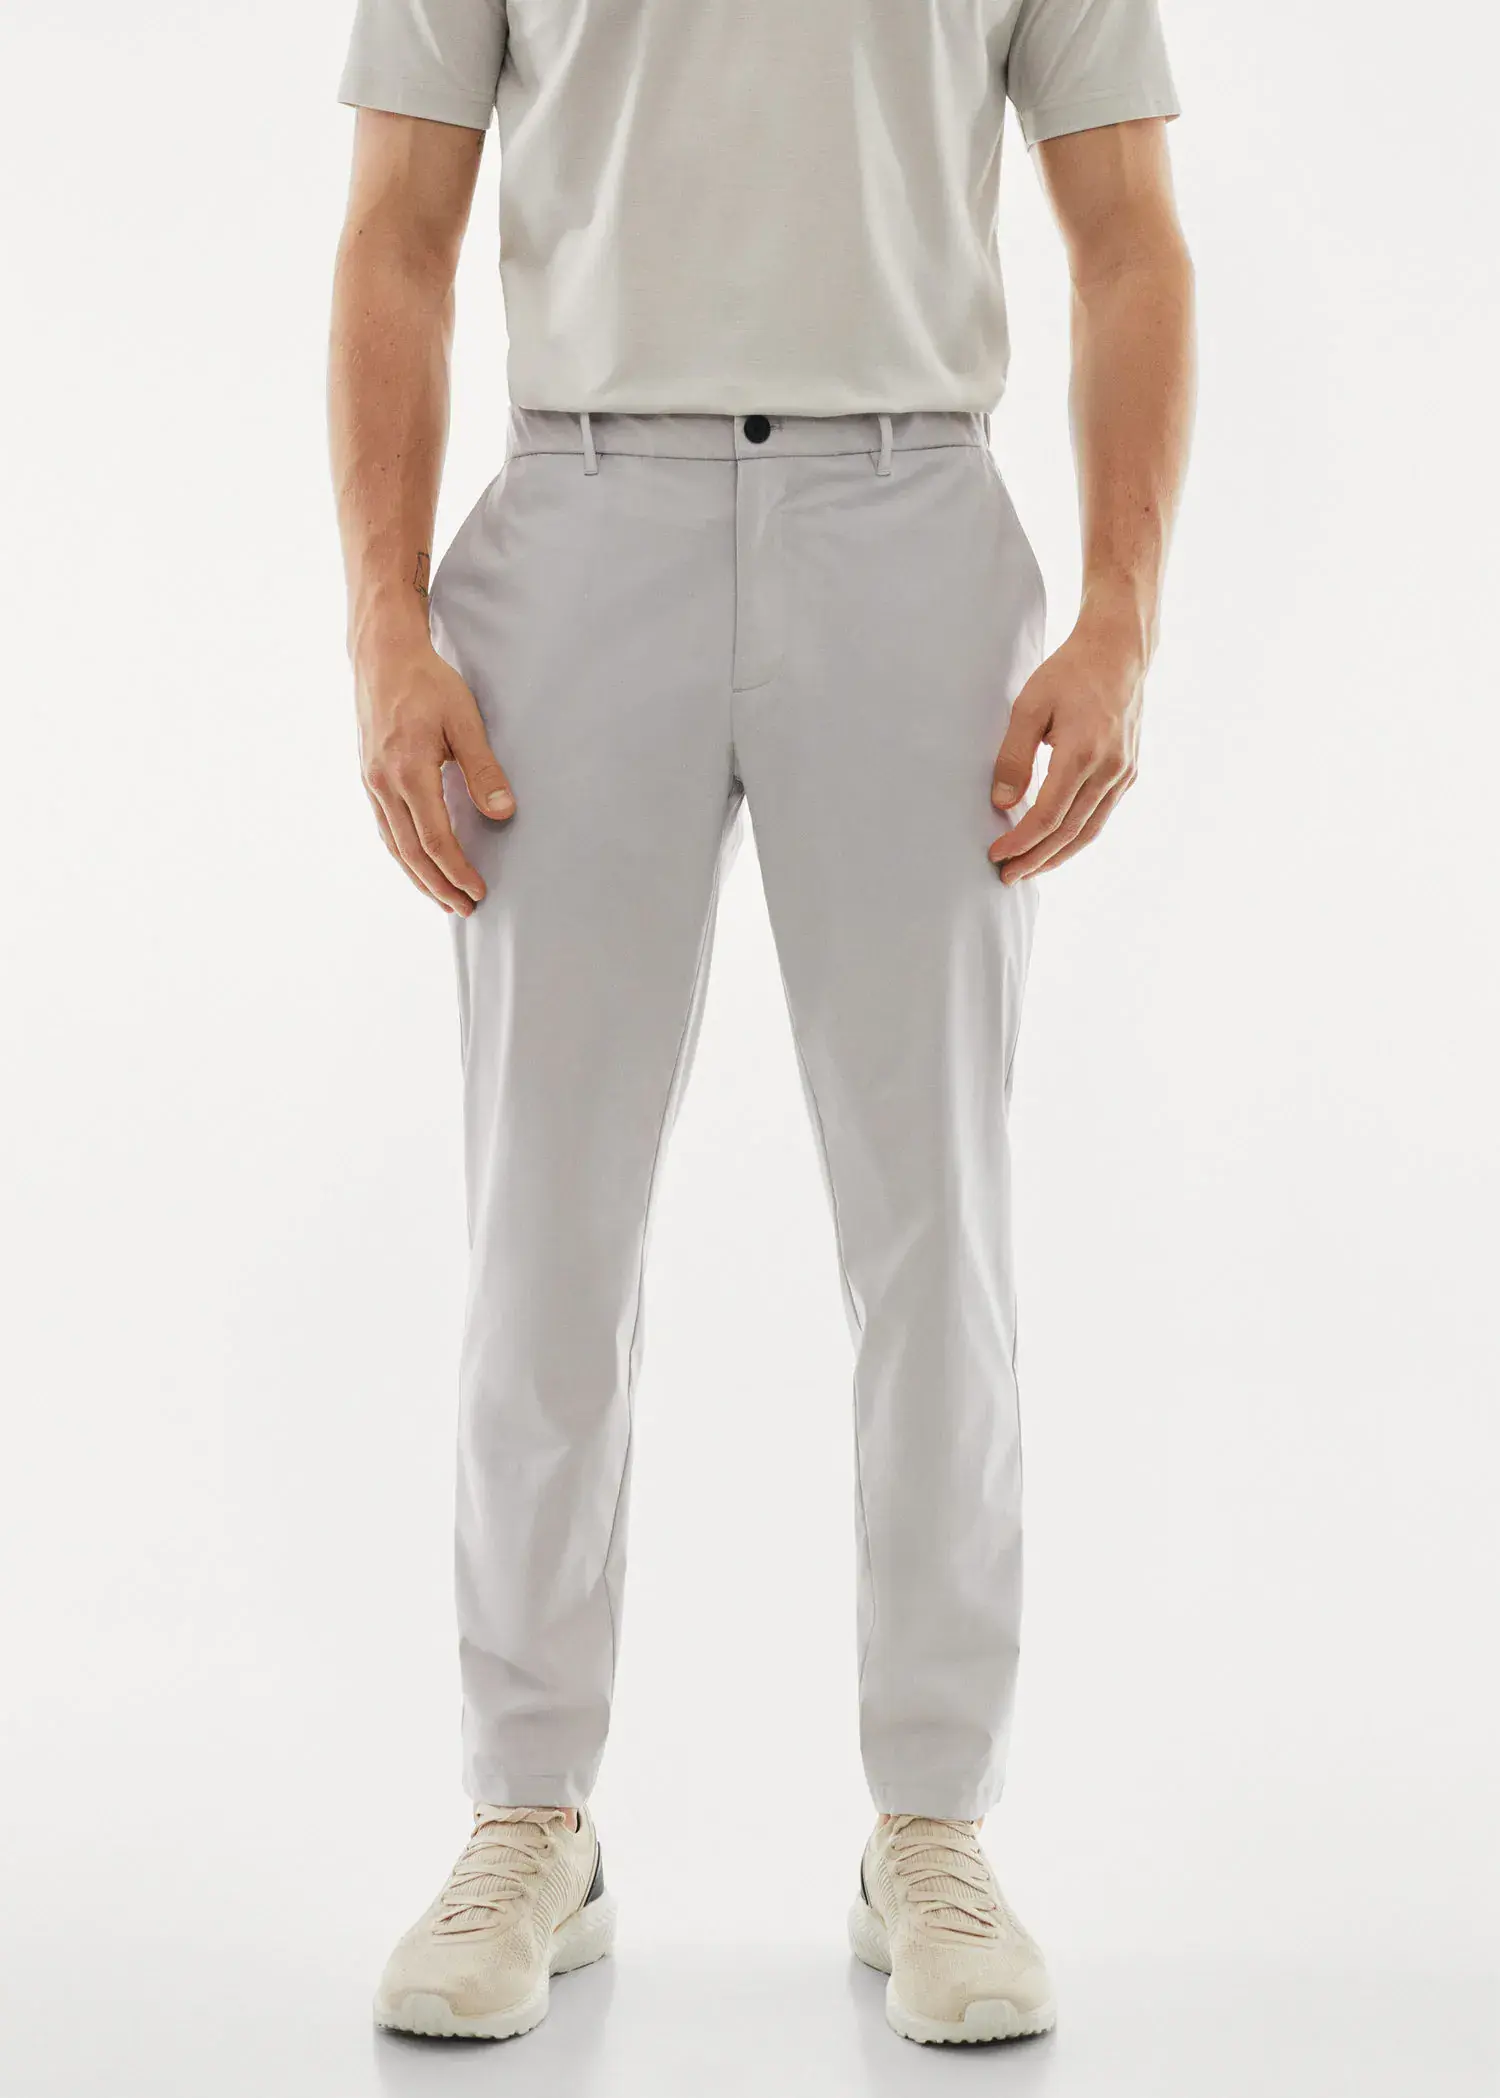 Mango Water-repellent technical trousers. a man wearing a white shirt and gray pants. 